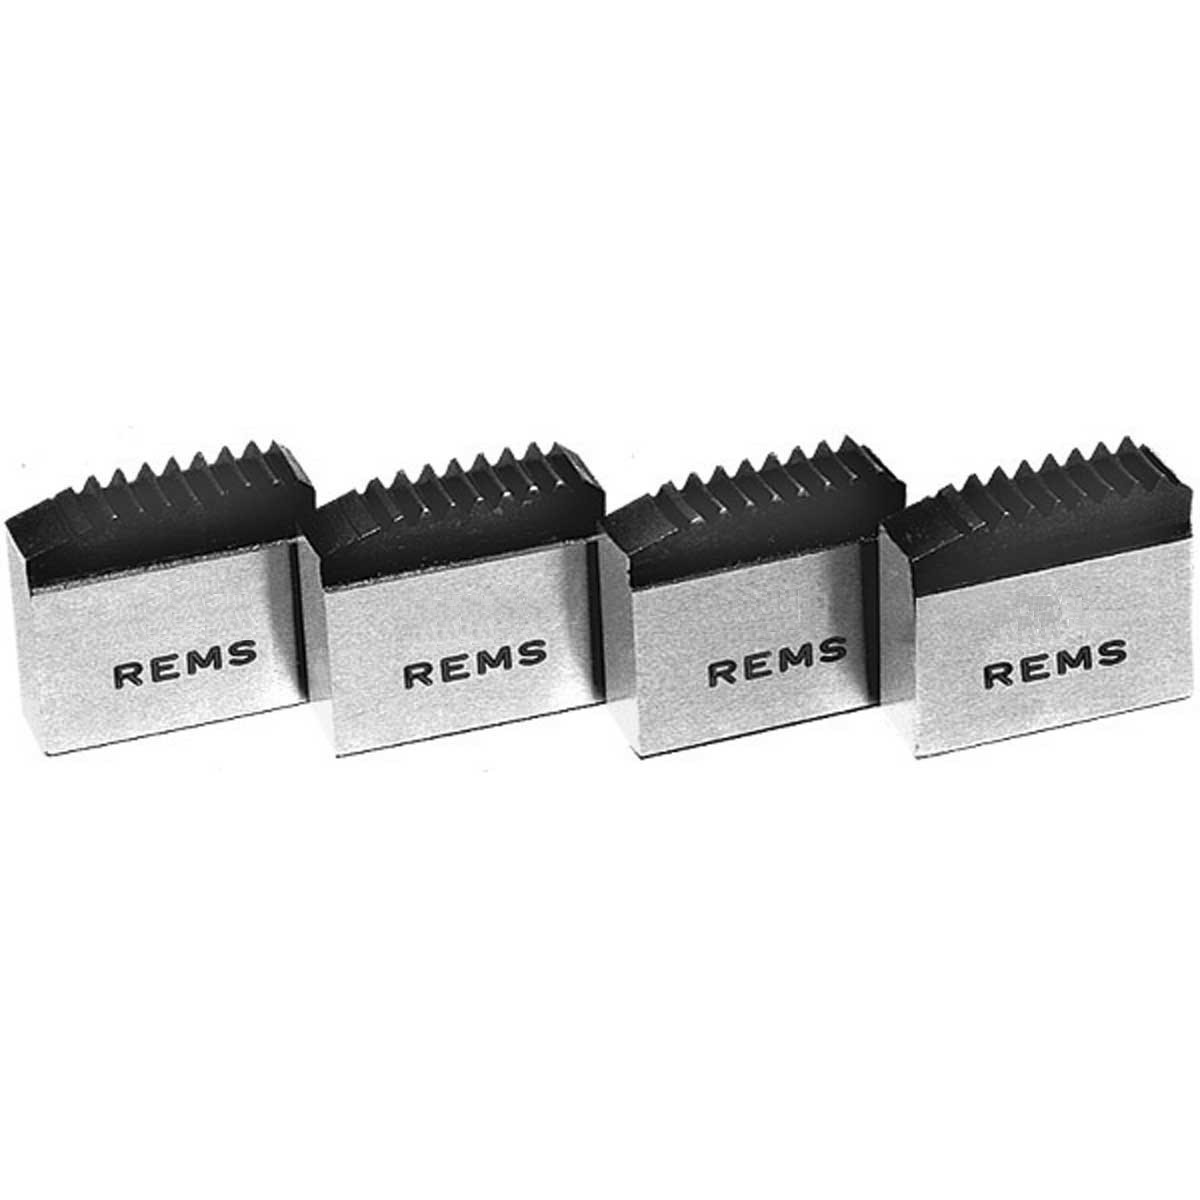 REMS - 1-1/2" Replacement Die Set, 521272